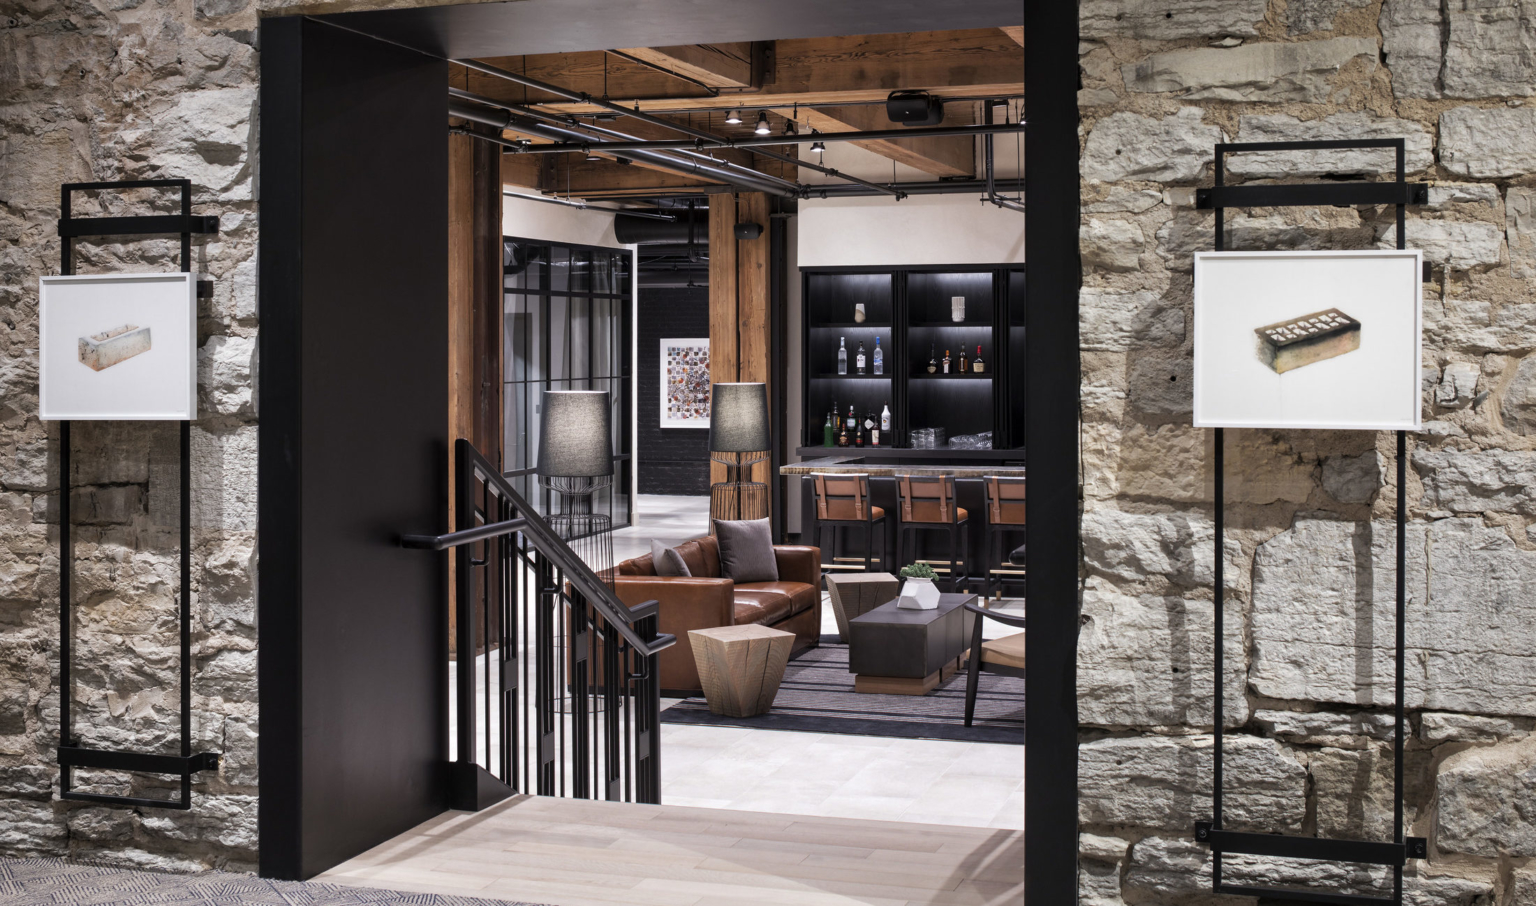 Stone wall with black doorframe leading to short stairwell. Below, seating area with exposed wood beams and columns